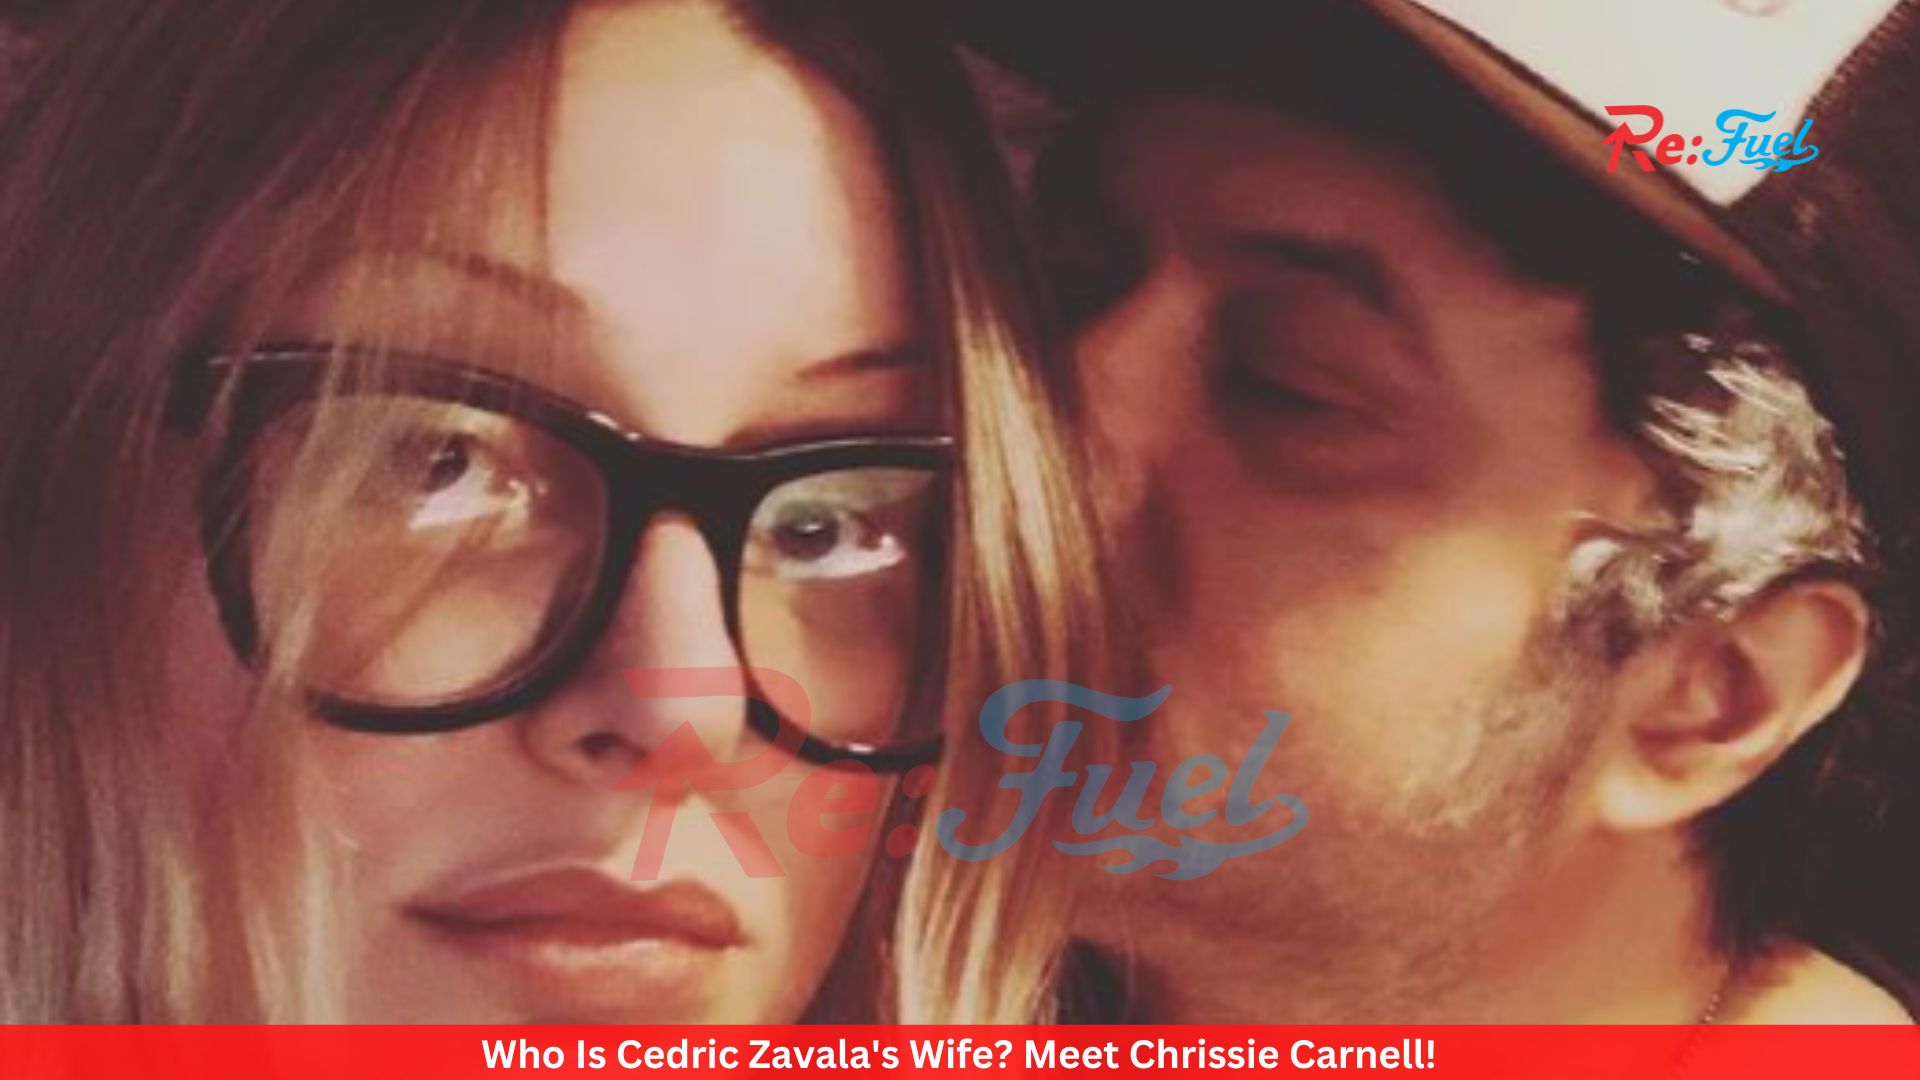 Who Is Cedric Zavala's Wife? Meet Chrissie Carnell!